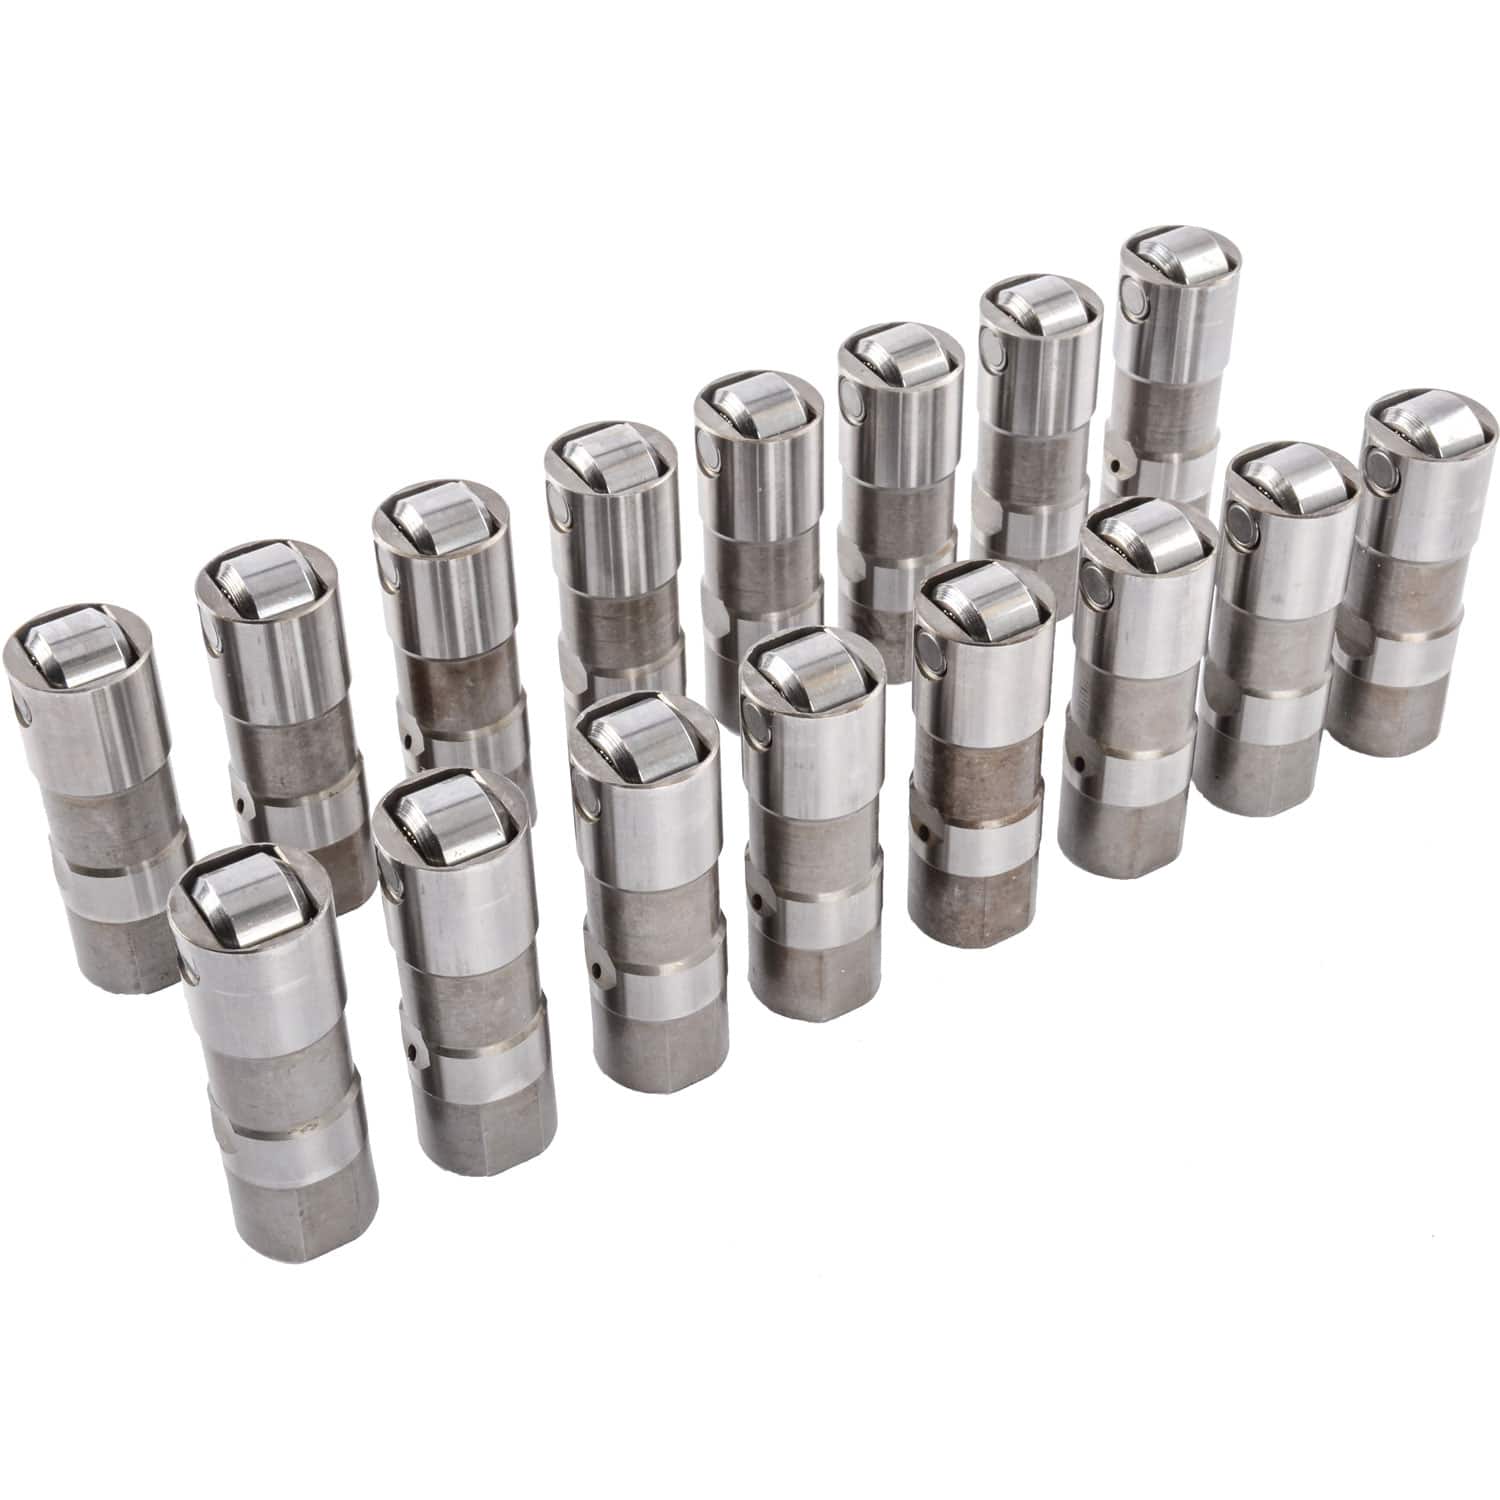 Engine Valve Lifter Replaces 12499225 16pcs Hydraulic Roller Lifters Set with 4 Guides Compatible with LS1 LS2 LS3 LS7 